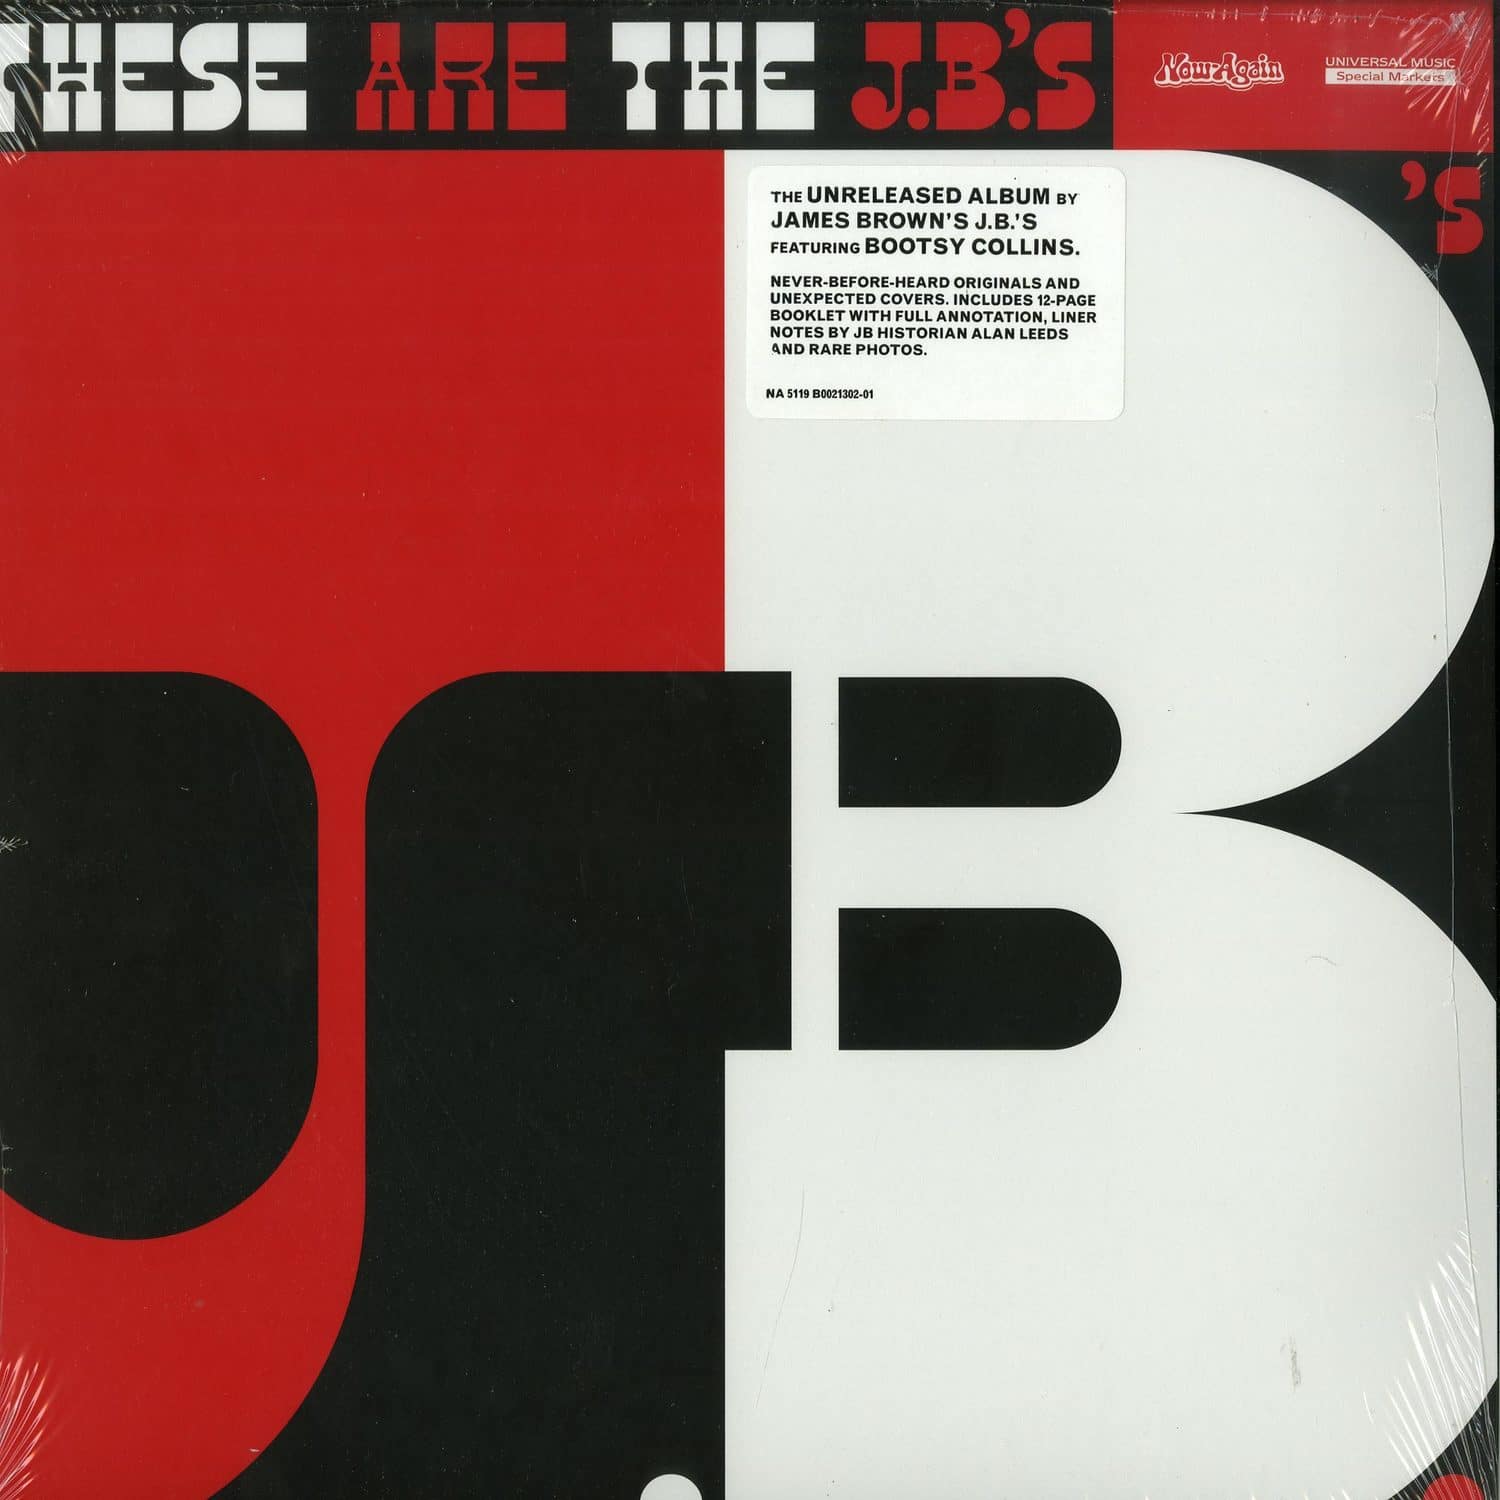 The JBs - THESE ARE THE JBS 